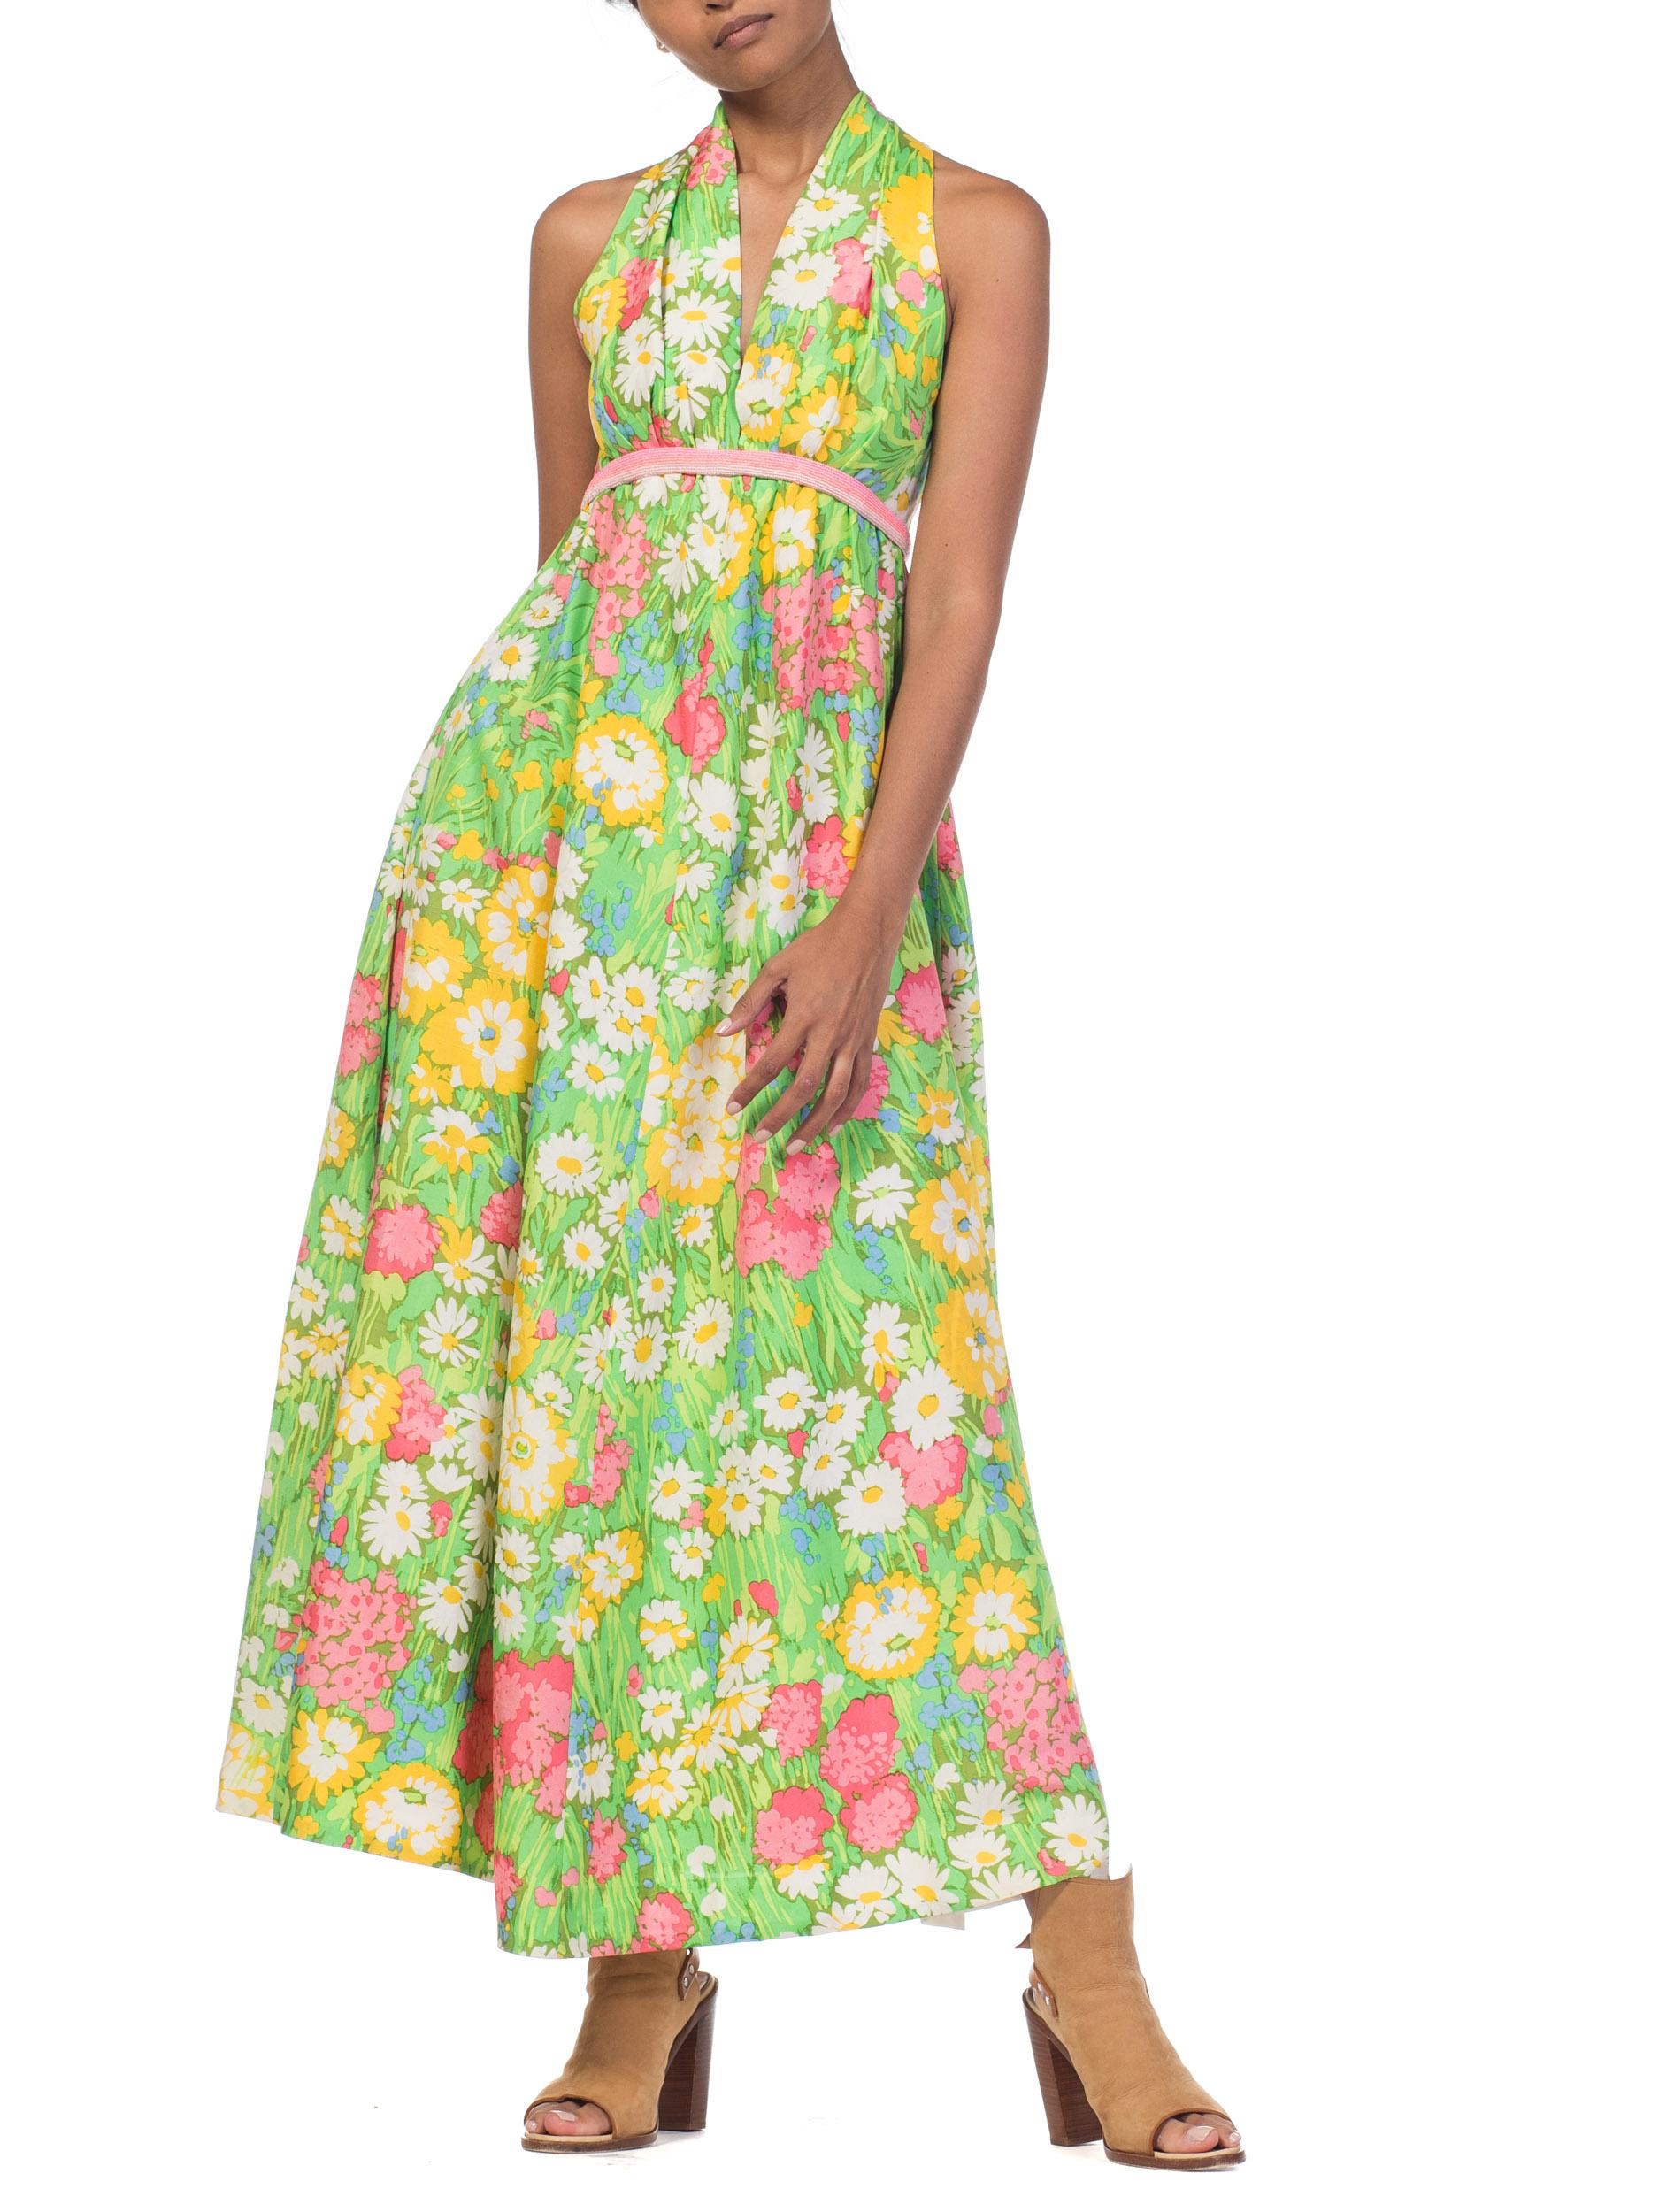 1960s 1970s Floral Printed Silk Halter Dress with Beading 13